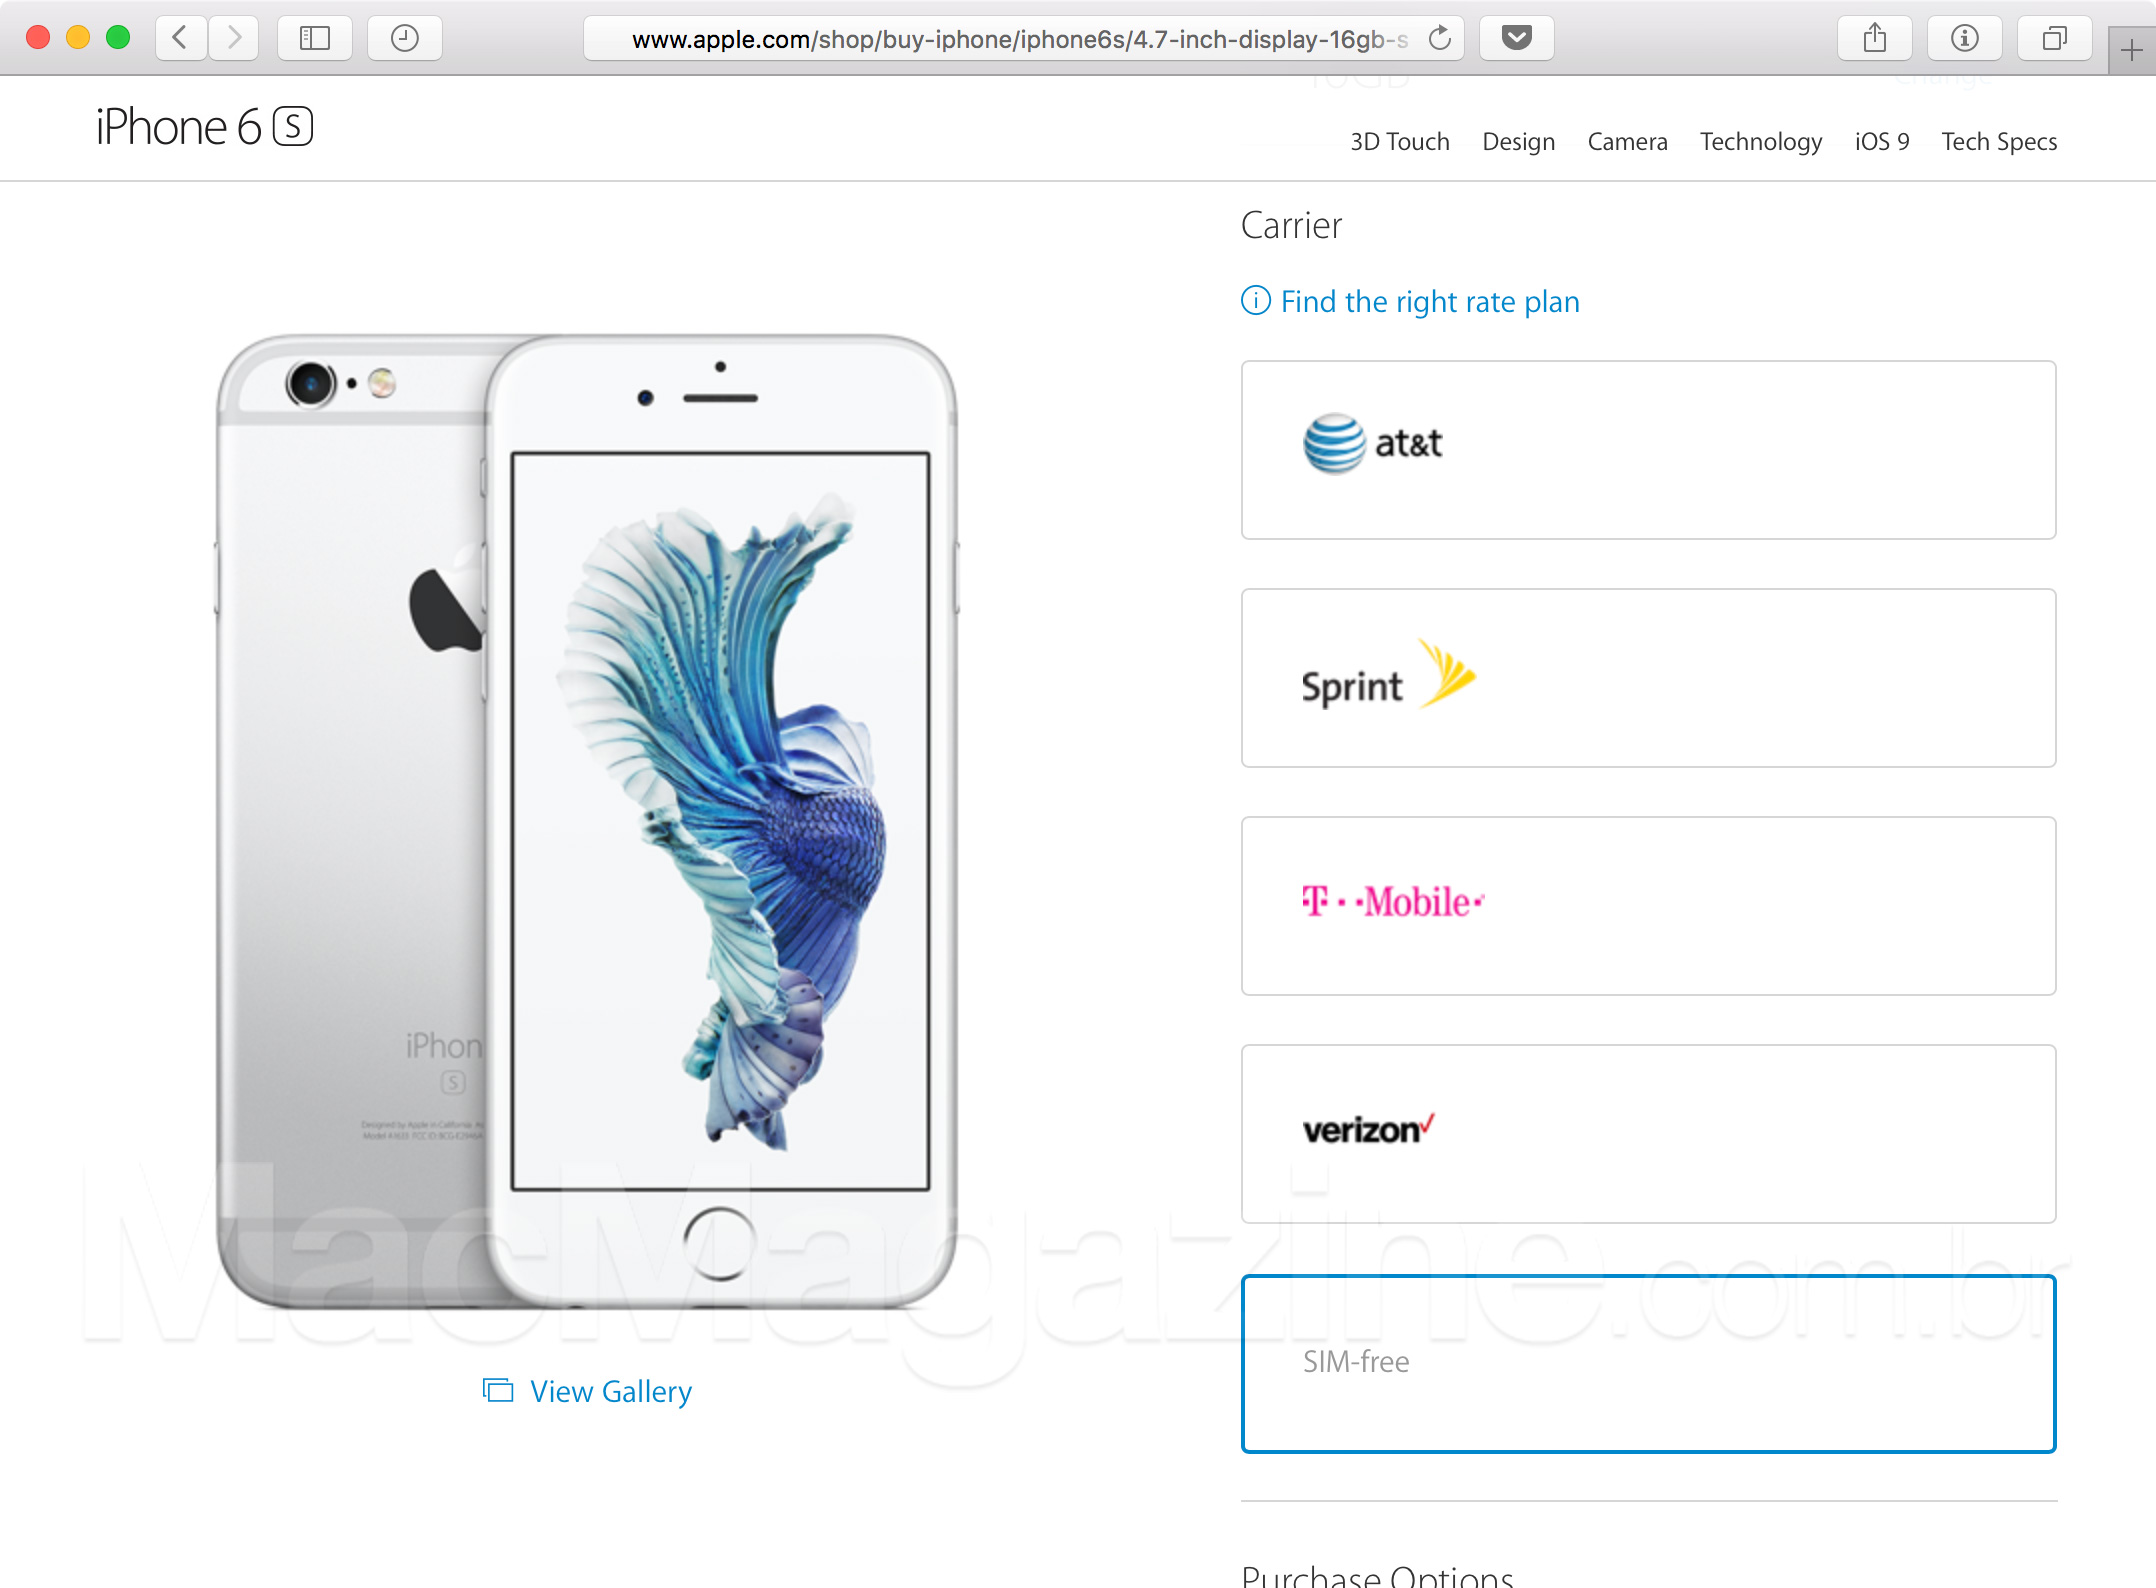 Apple starts selling iPhones 6s / 6s Plus unlocked "pure" in the US, but Brazilians should not choose them